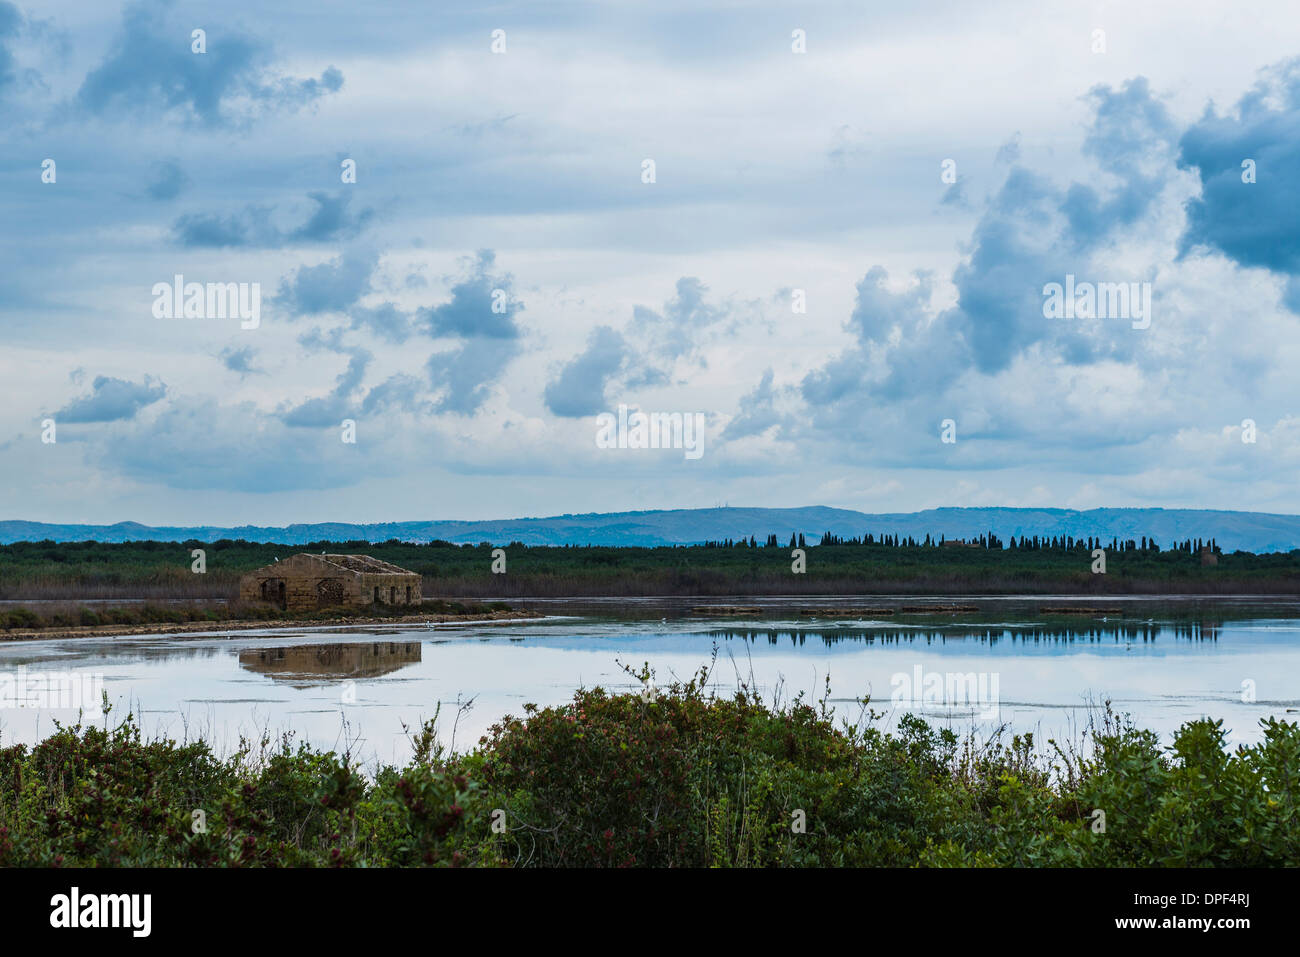 Vendicari Nature Reserve, ruins of the old salt makers house, South East Sicily, Italy, Europe Stock Photo